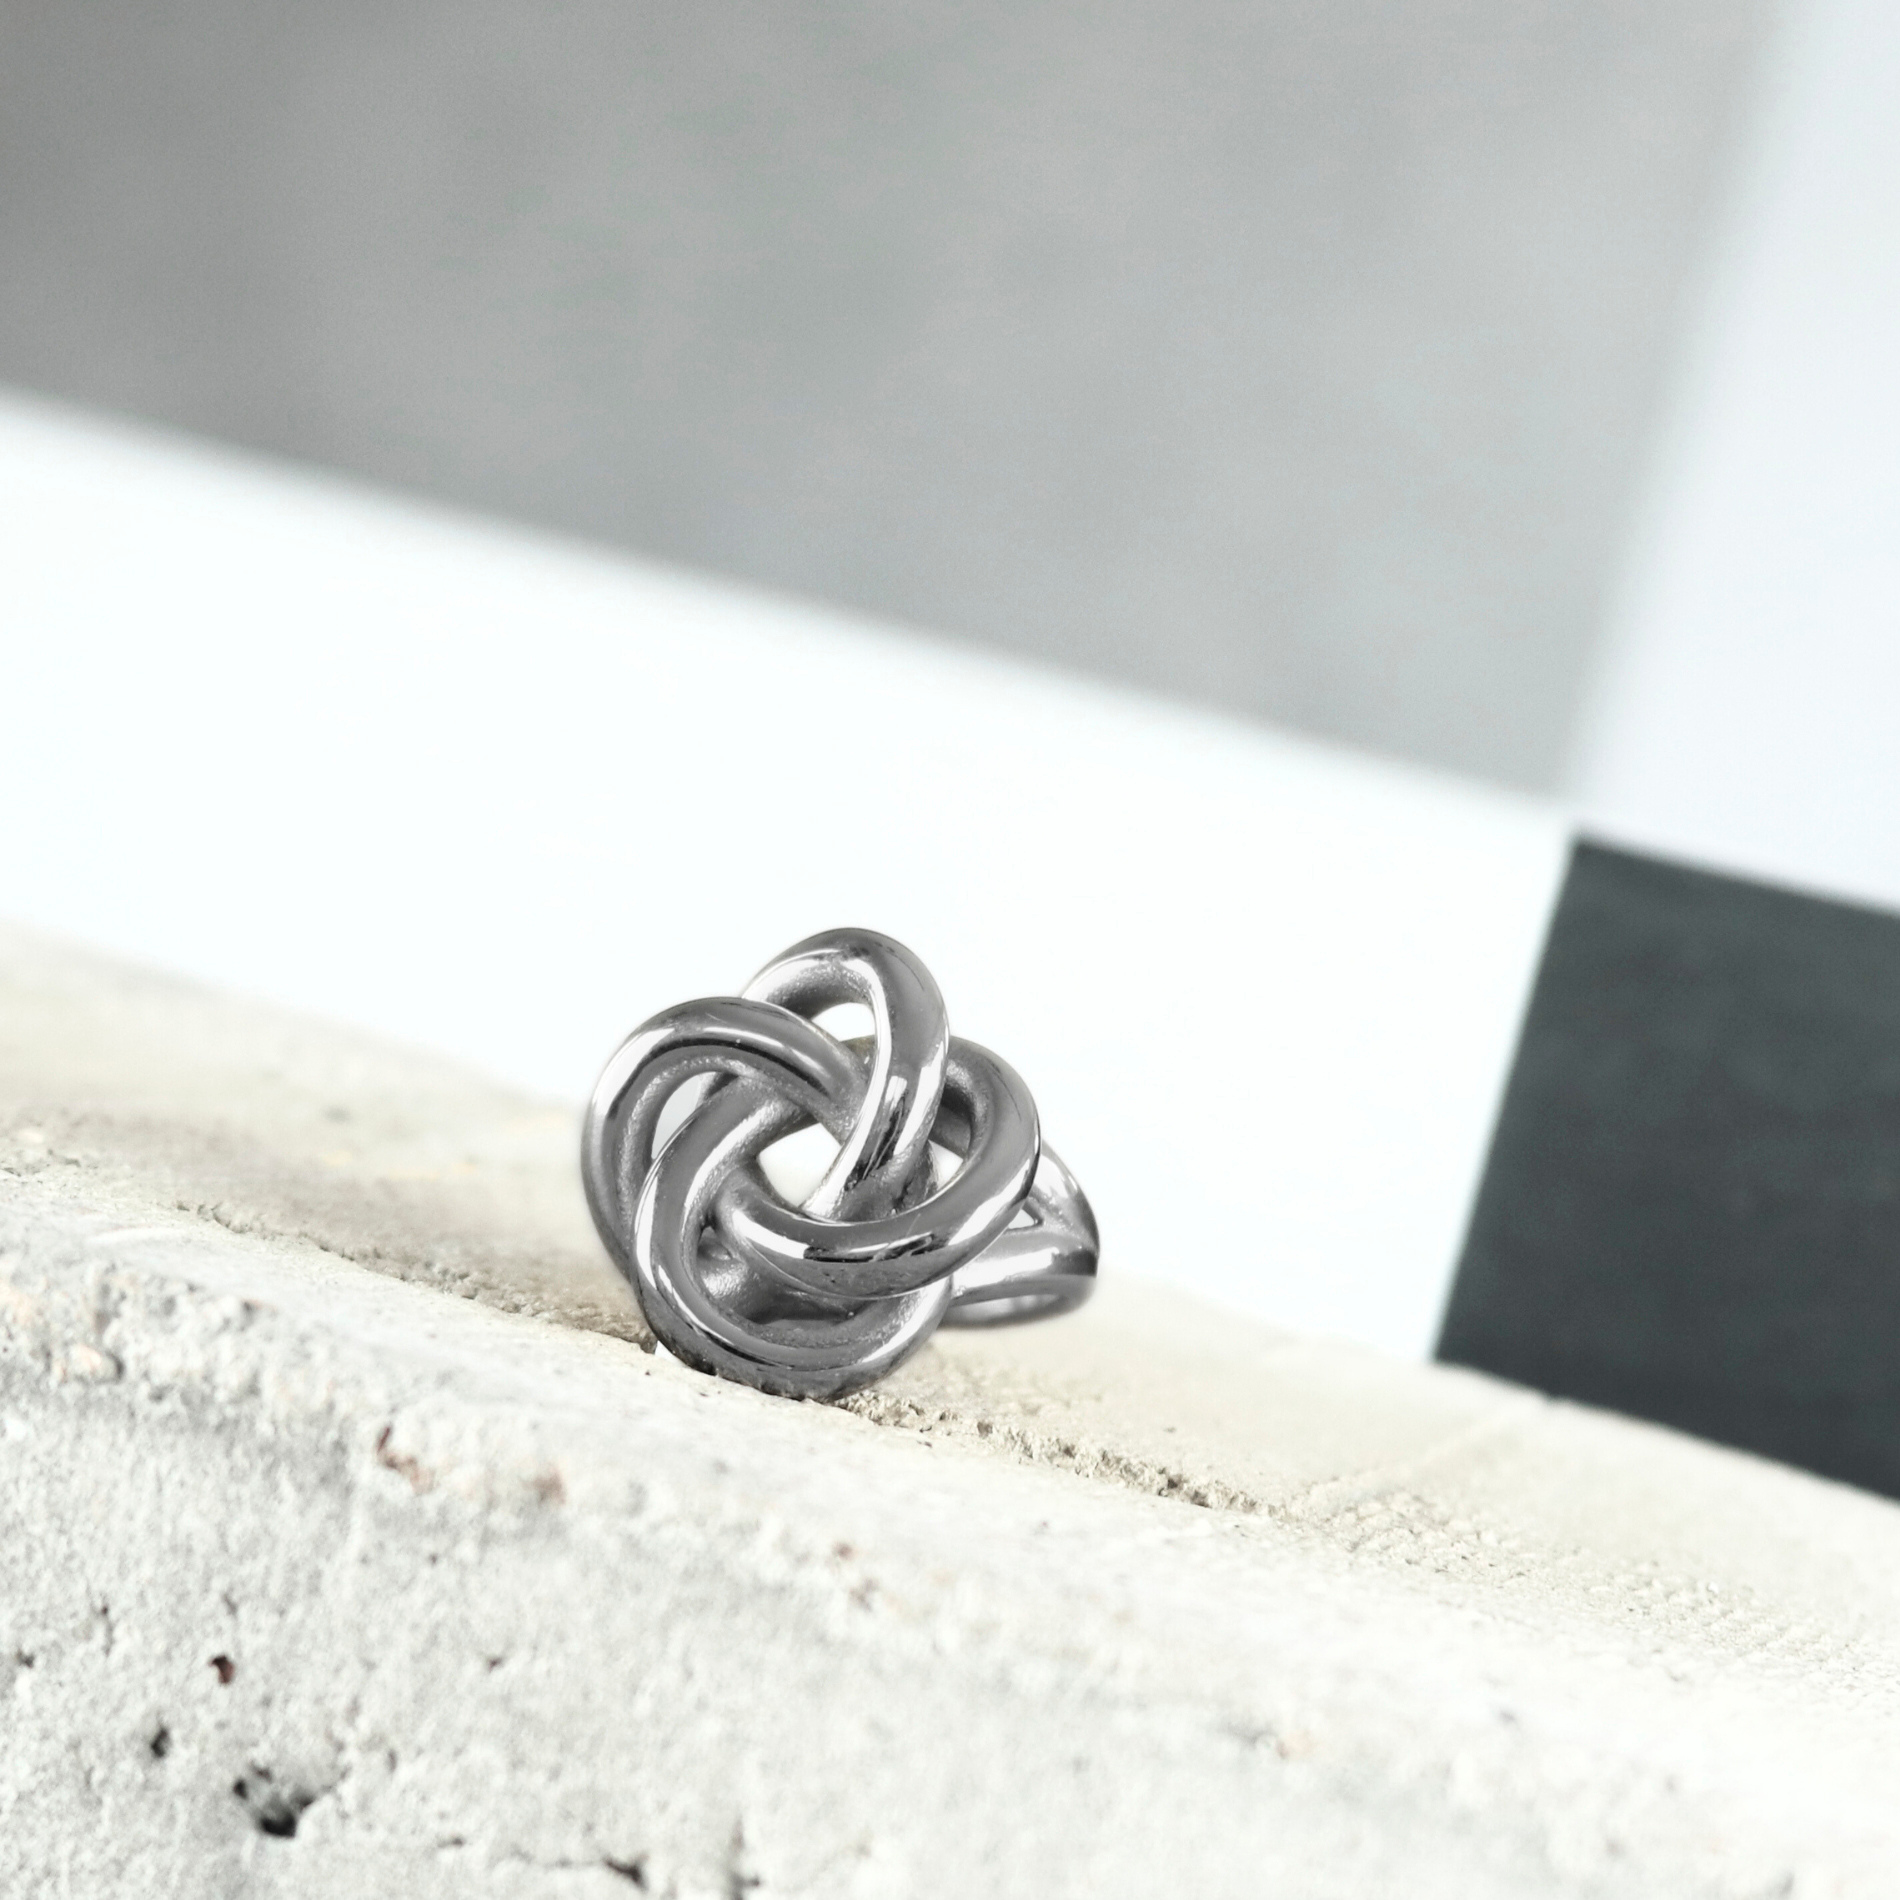 Courage Waterproof Chunky Twisted Statement Ring Silver Plating I Dansk Copenhagen